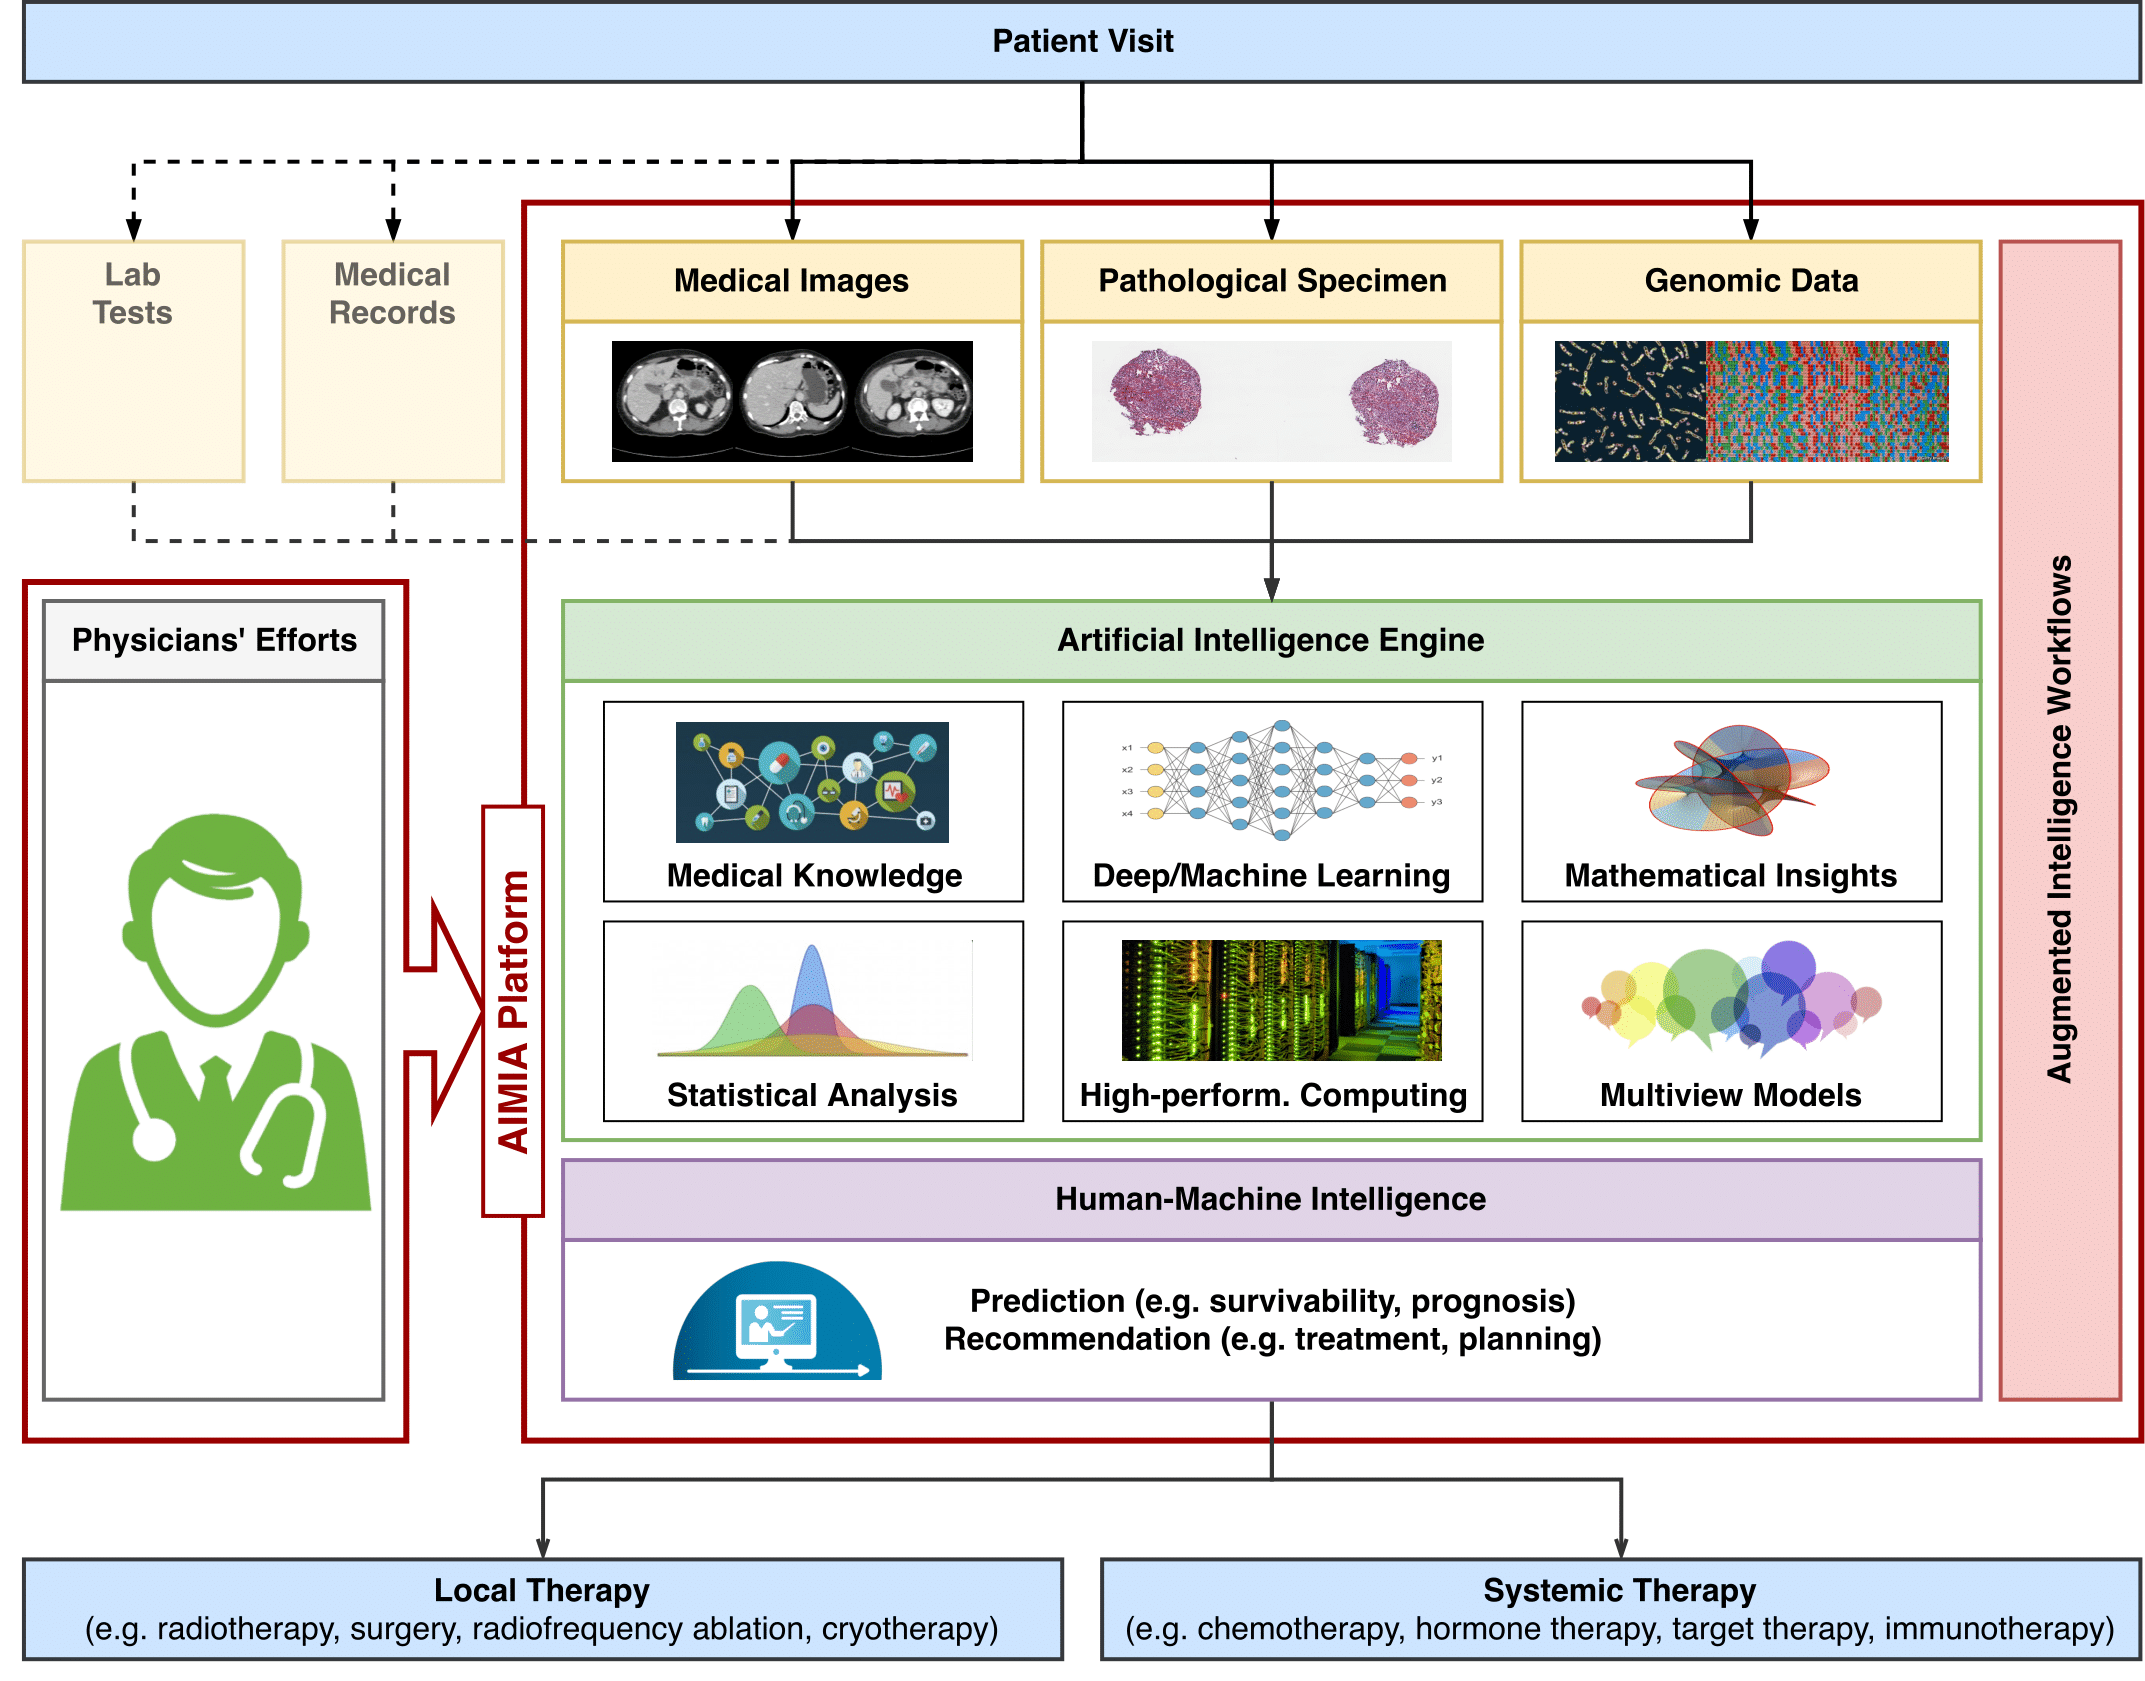 AIMIA: Artificial Intelligence for Medical Image Analysis Platform